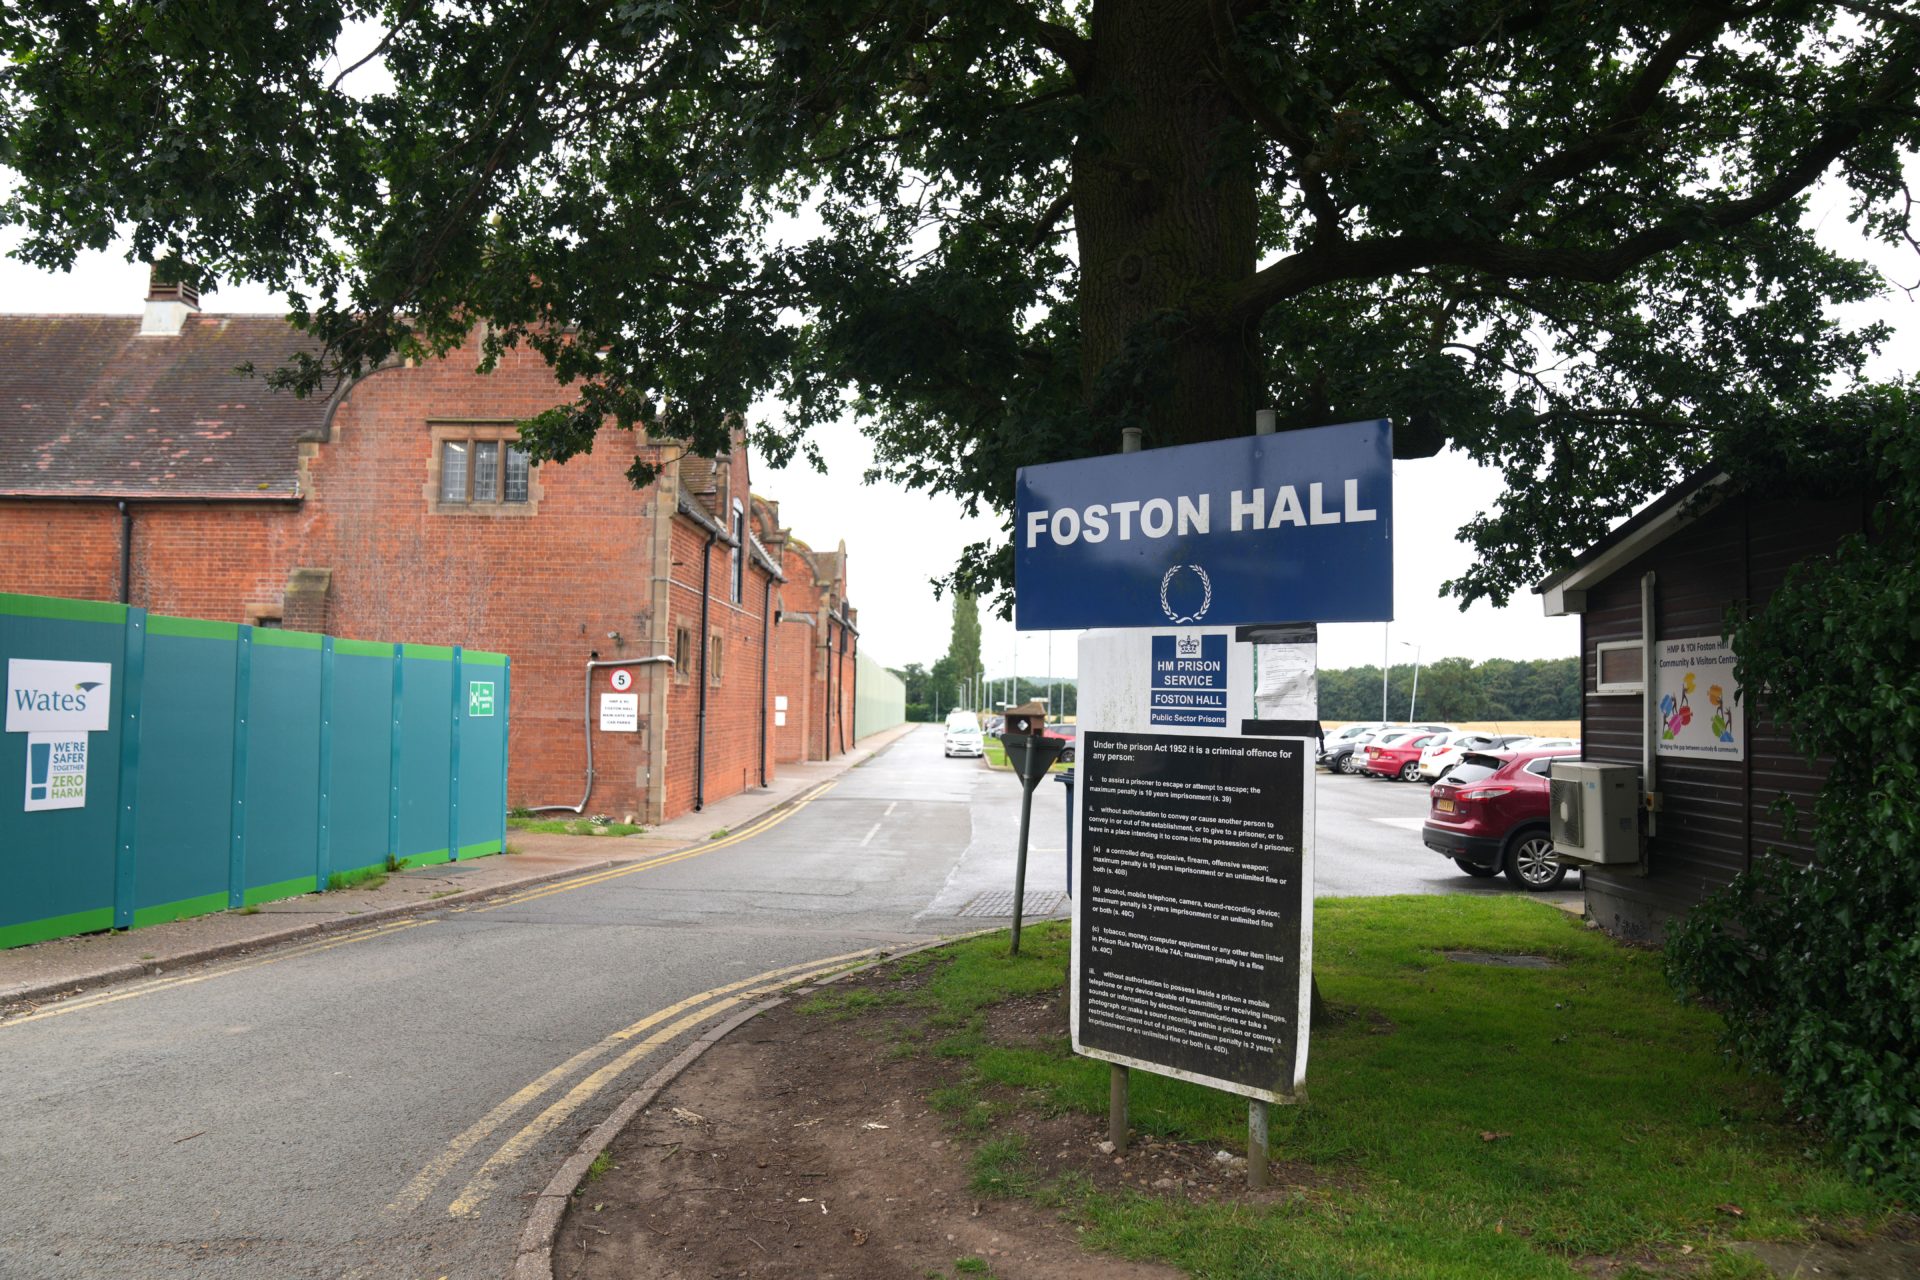 Foston Hall prison in Derbyshire, UK, where Carla Foster is being held ahead of her release.